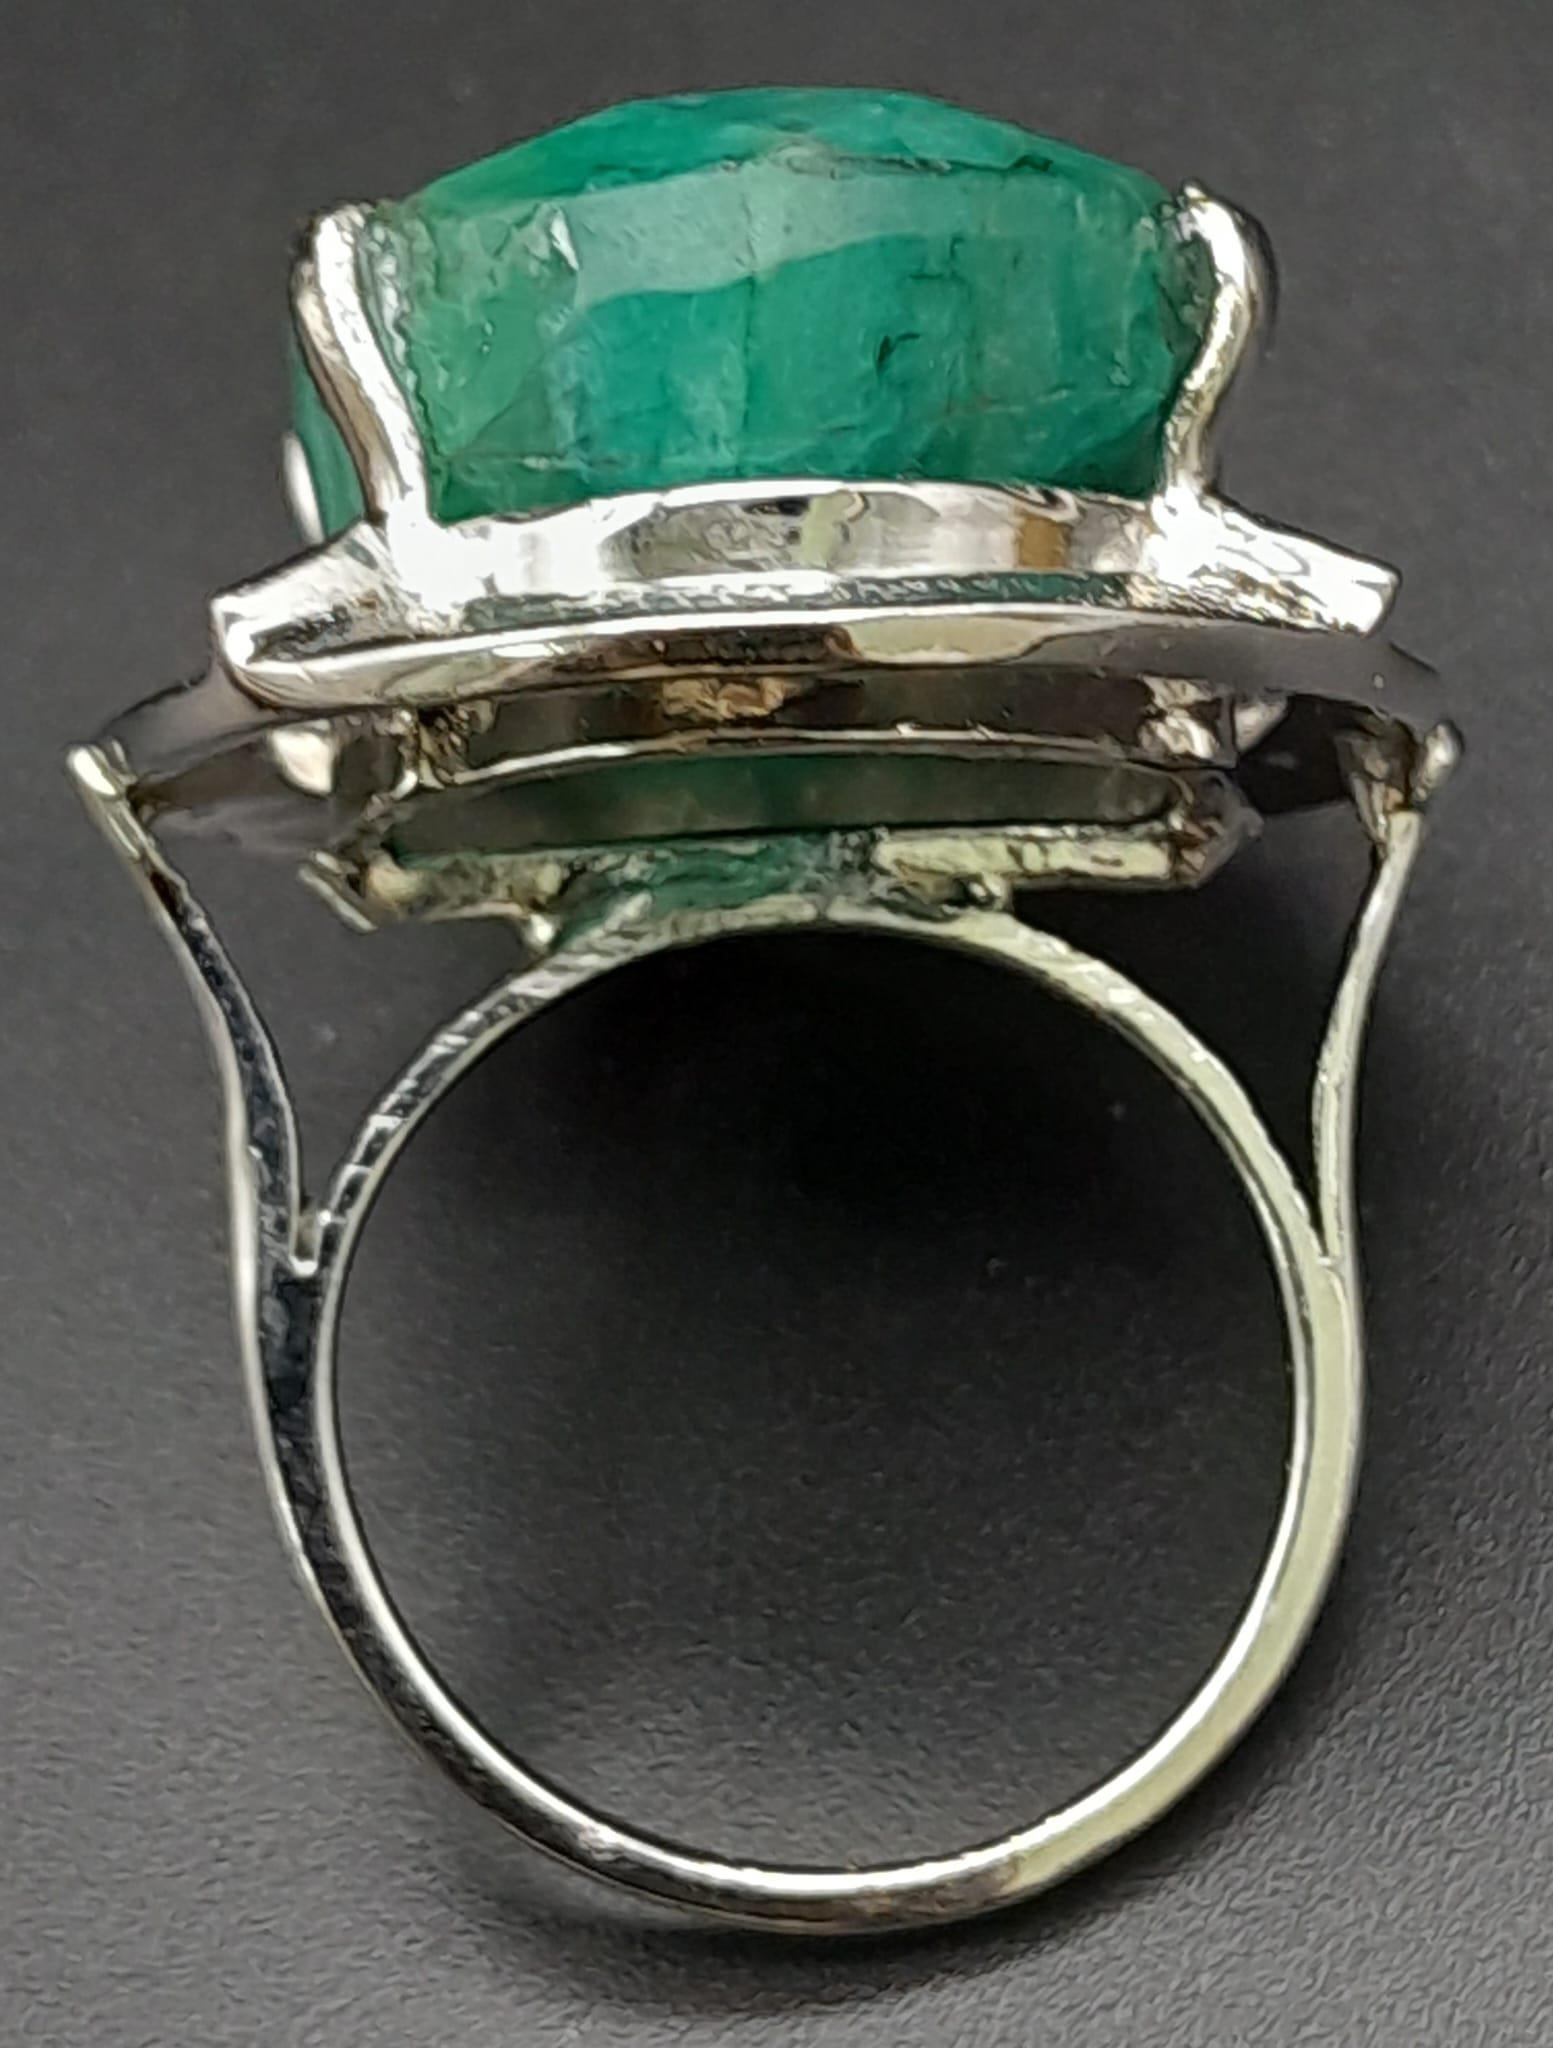 A 50ct Brazilian Oval Cut Emerald Ring. Set in 925 Sterling Silver. Size P. Comes with a - Image 4 of 7